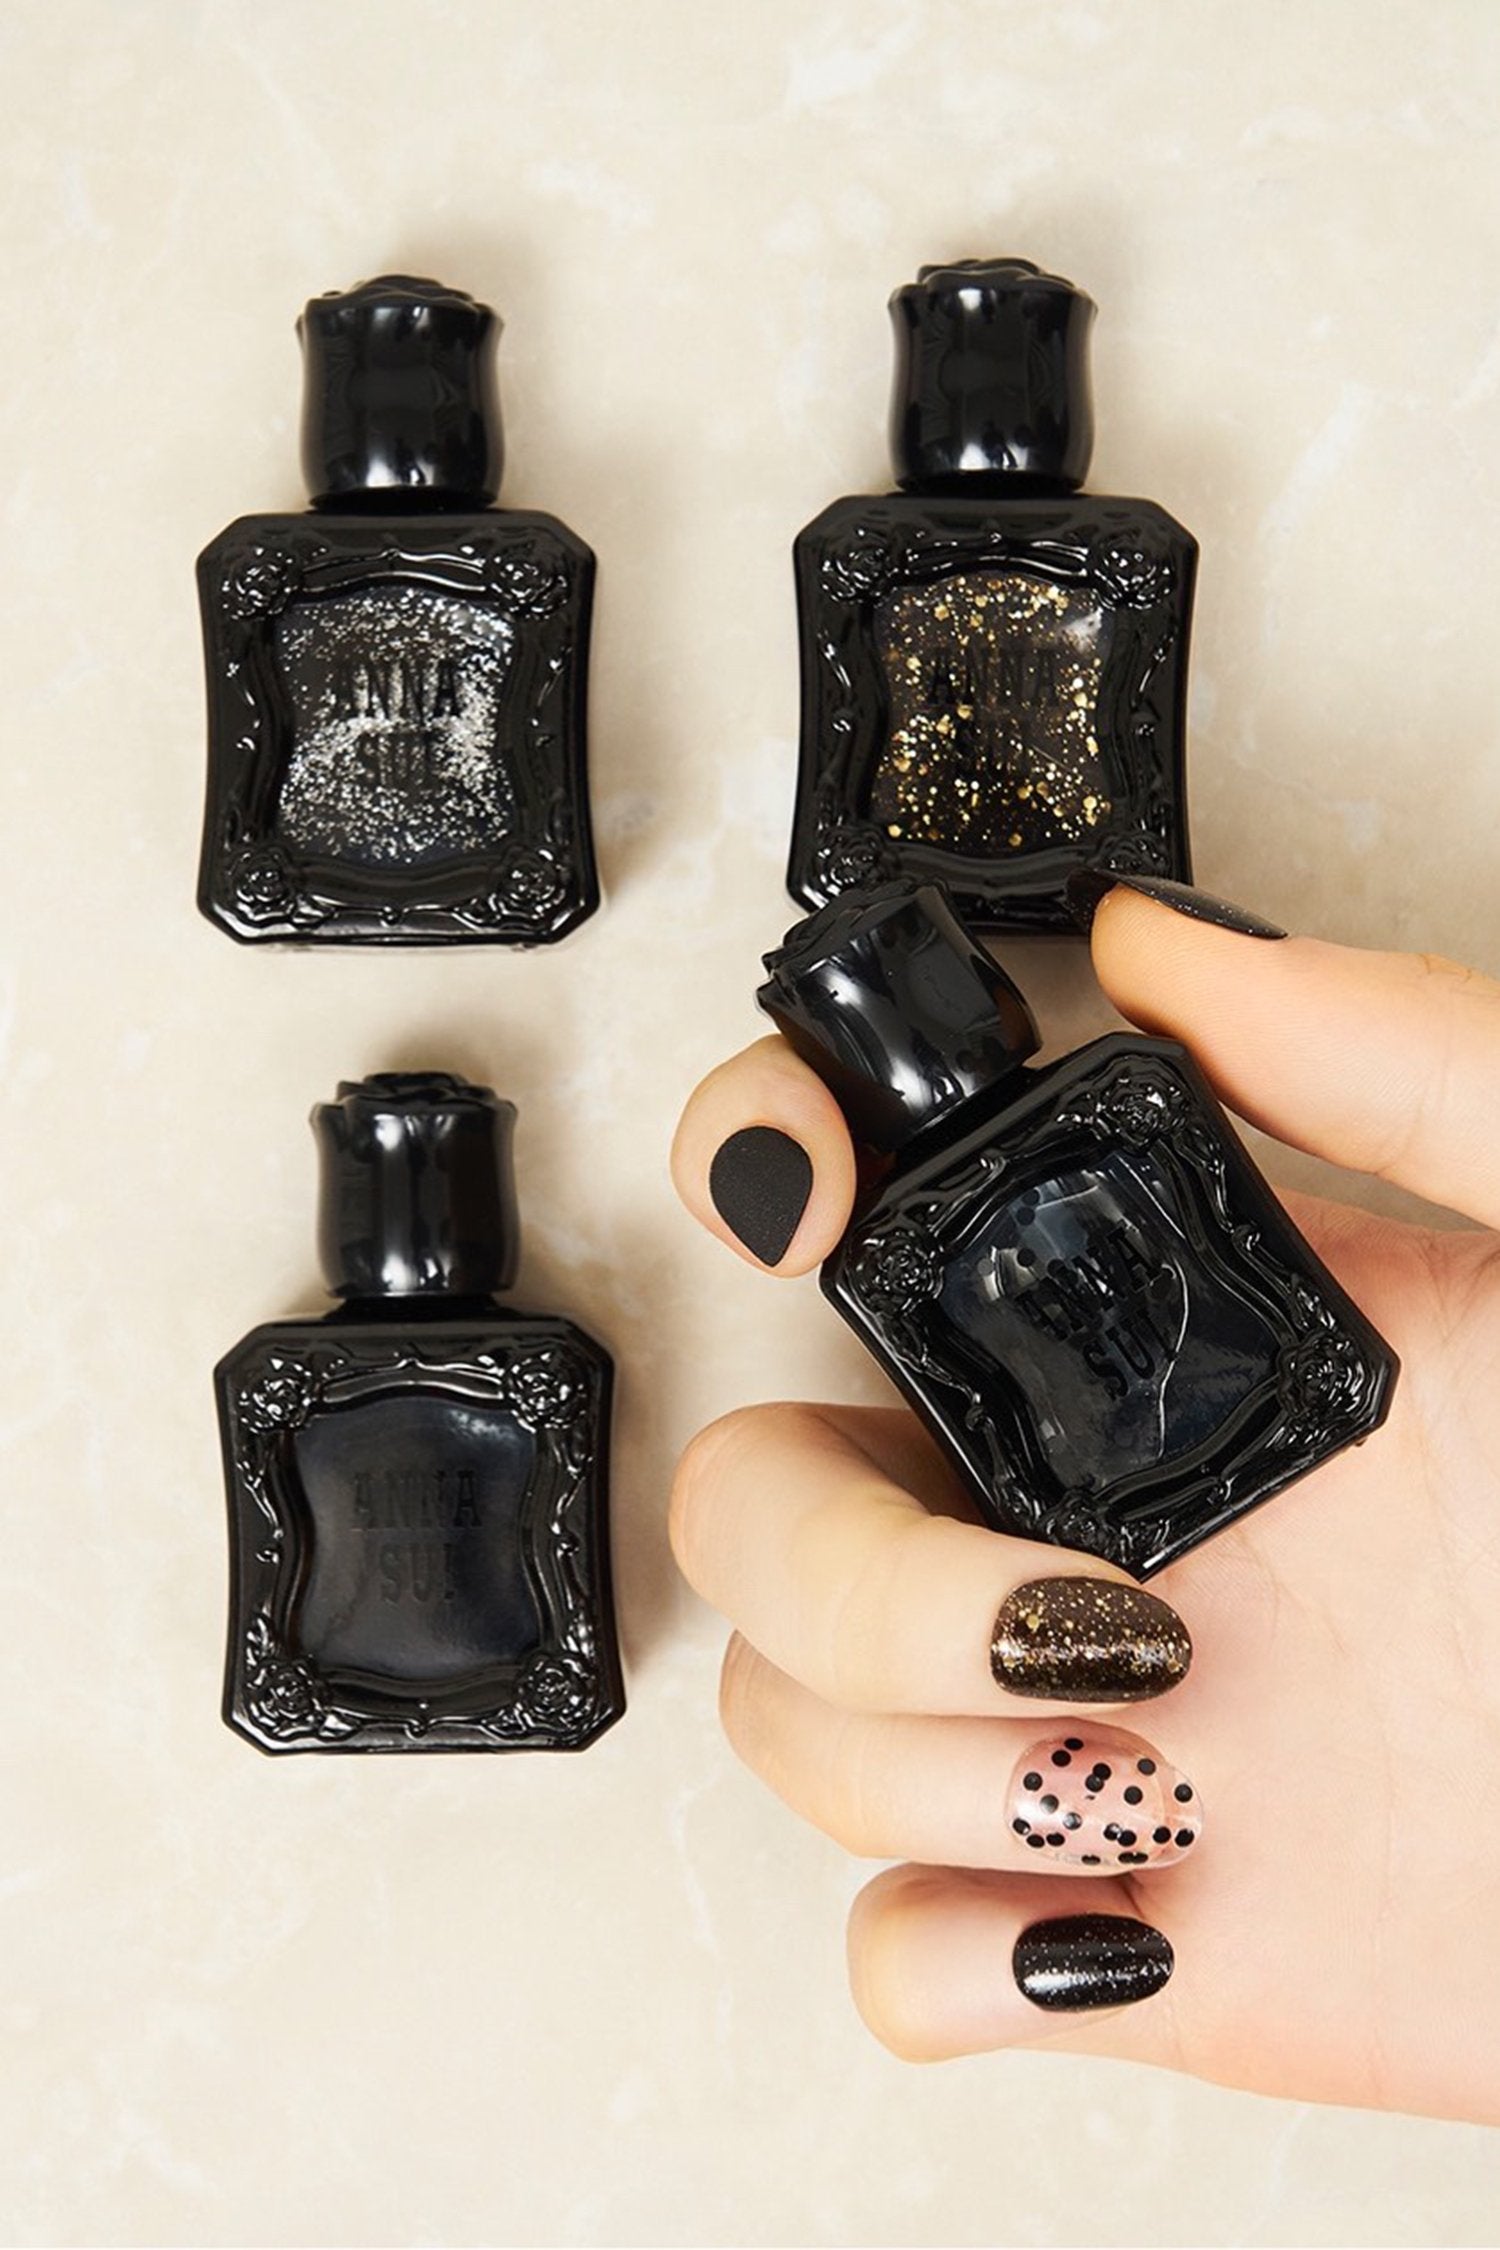 Inspired by the fragrance 4 bottles, black container with raised rose pattern, Anna Sui on dark color.